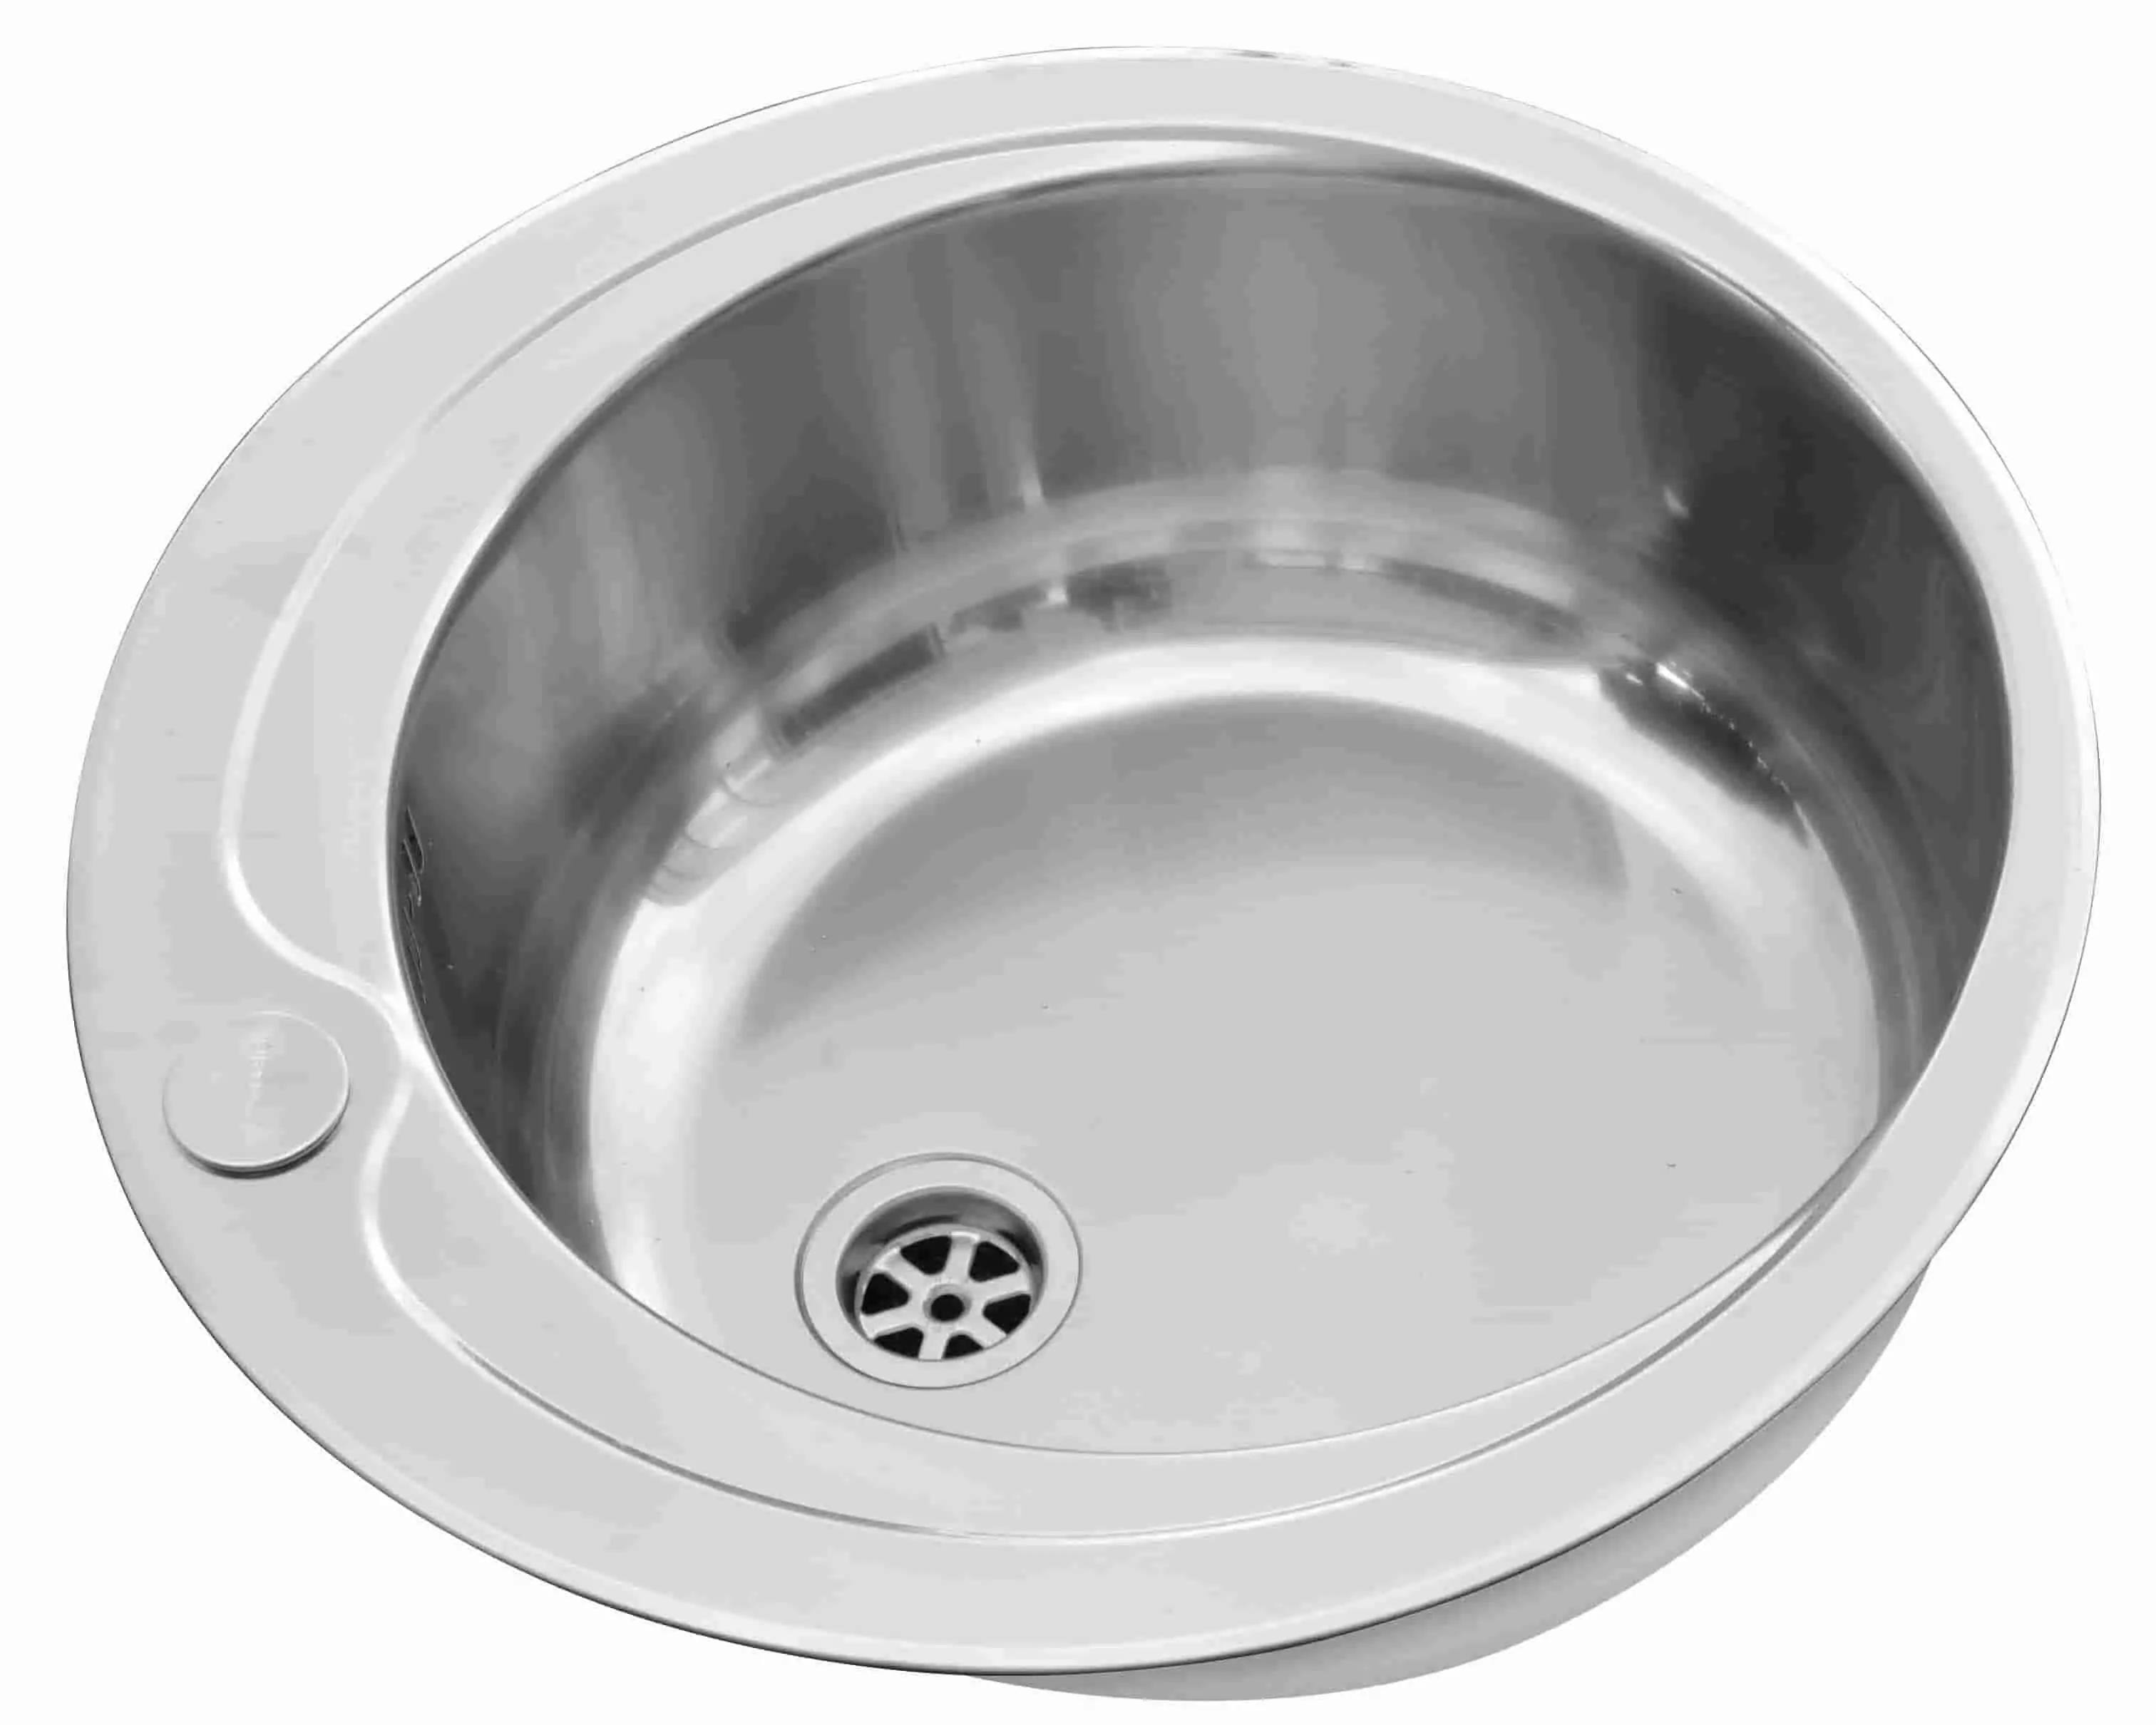 Pyramis round bowl sink with tap hole